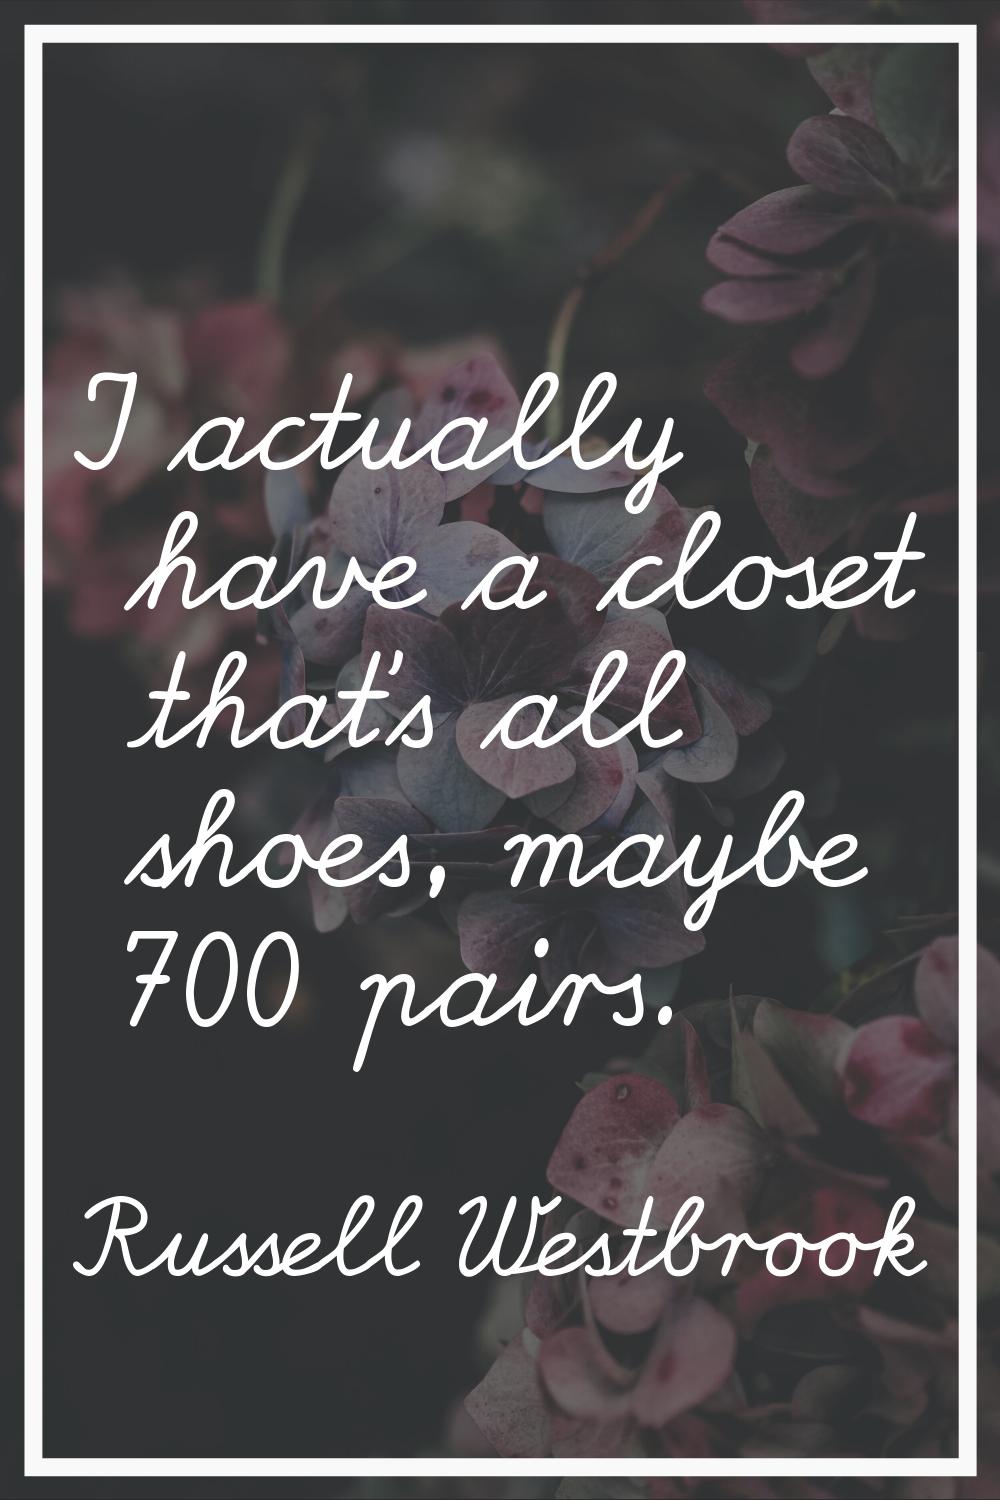 I actually have a closet that's all shoes, maybe 700 pairs.